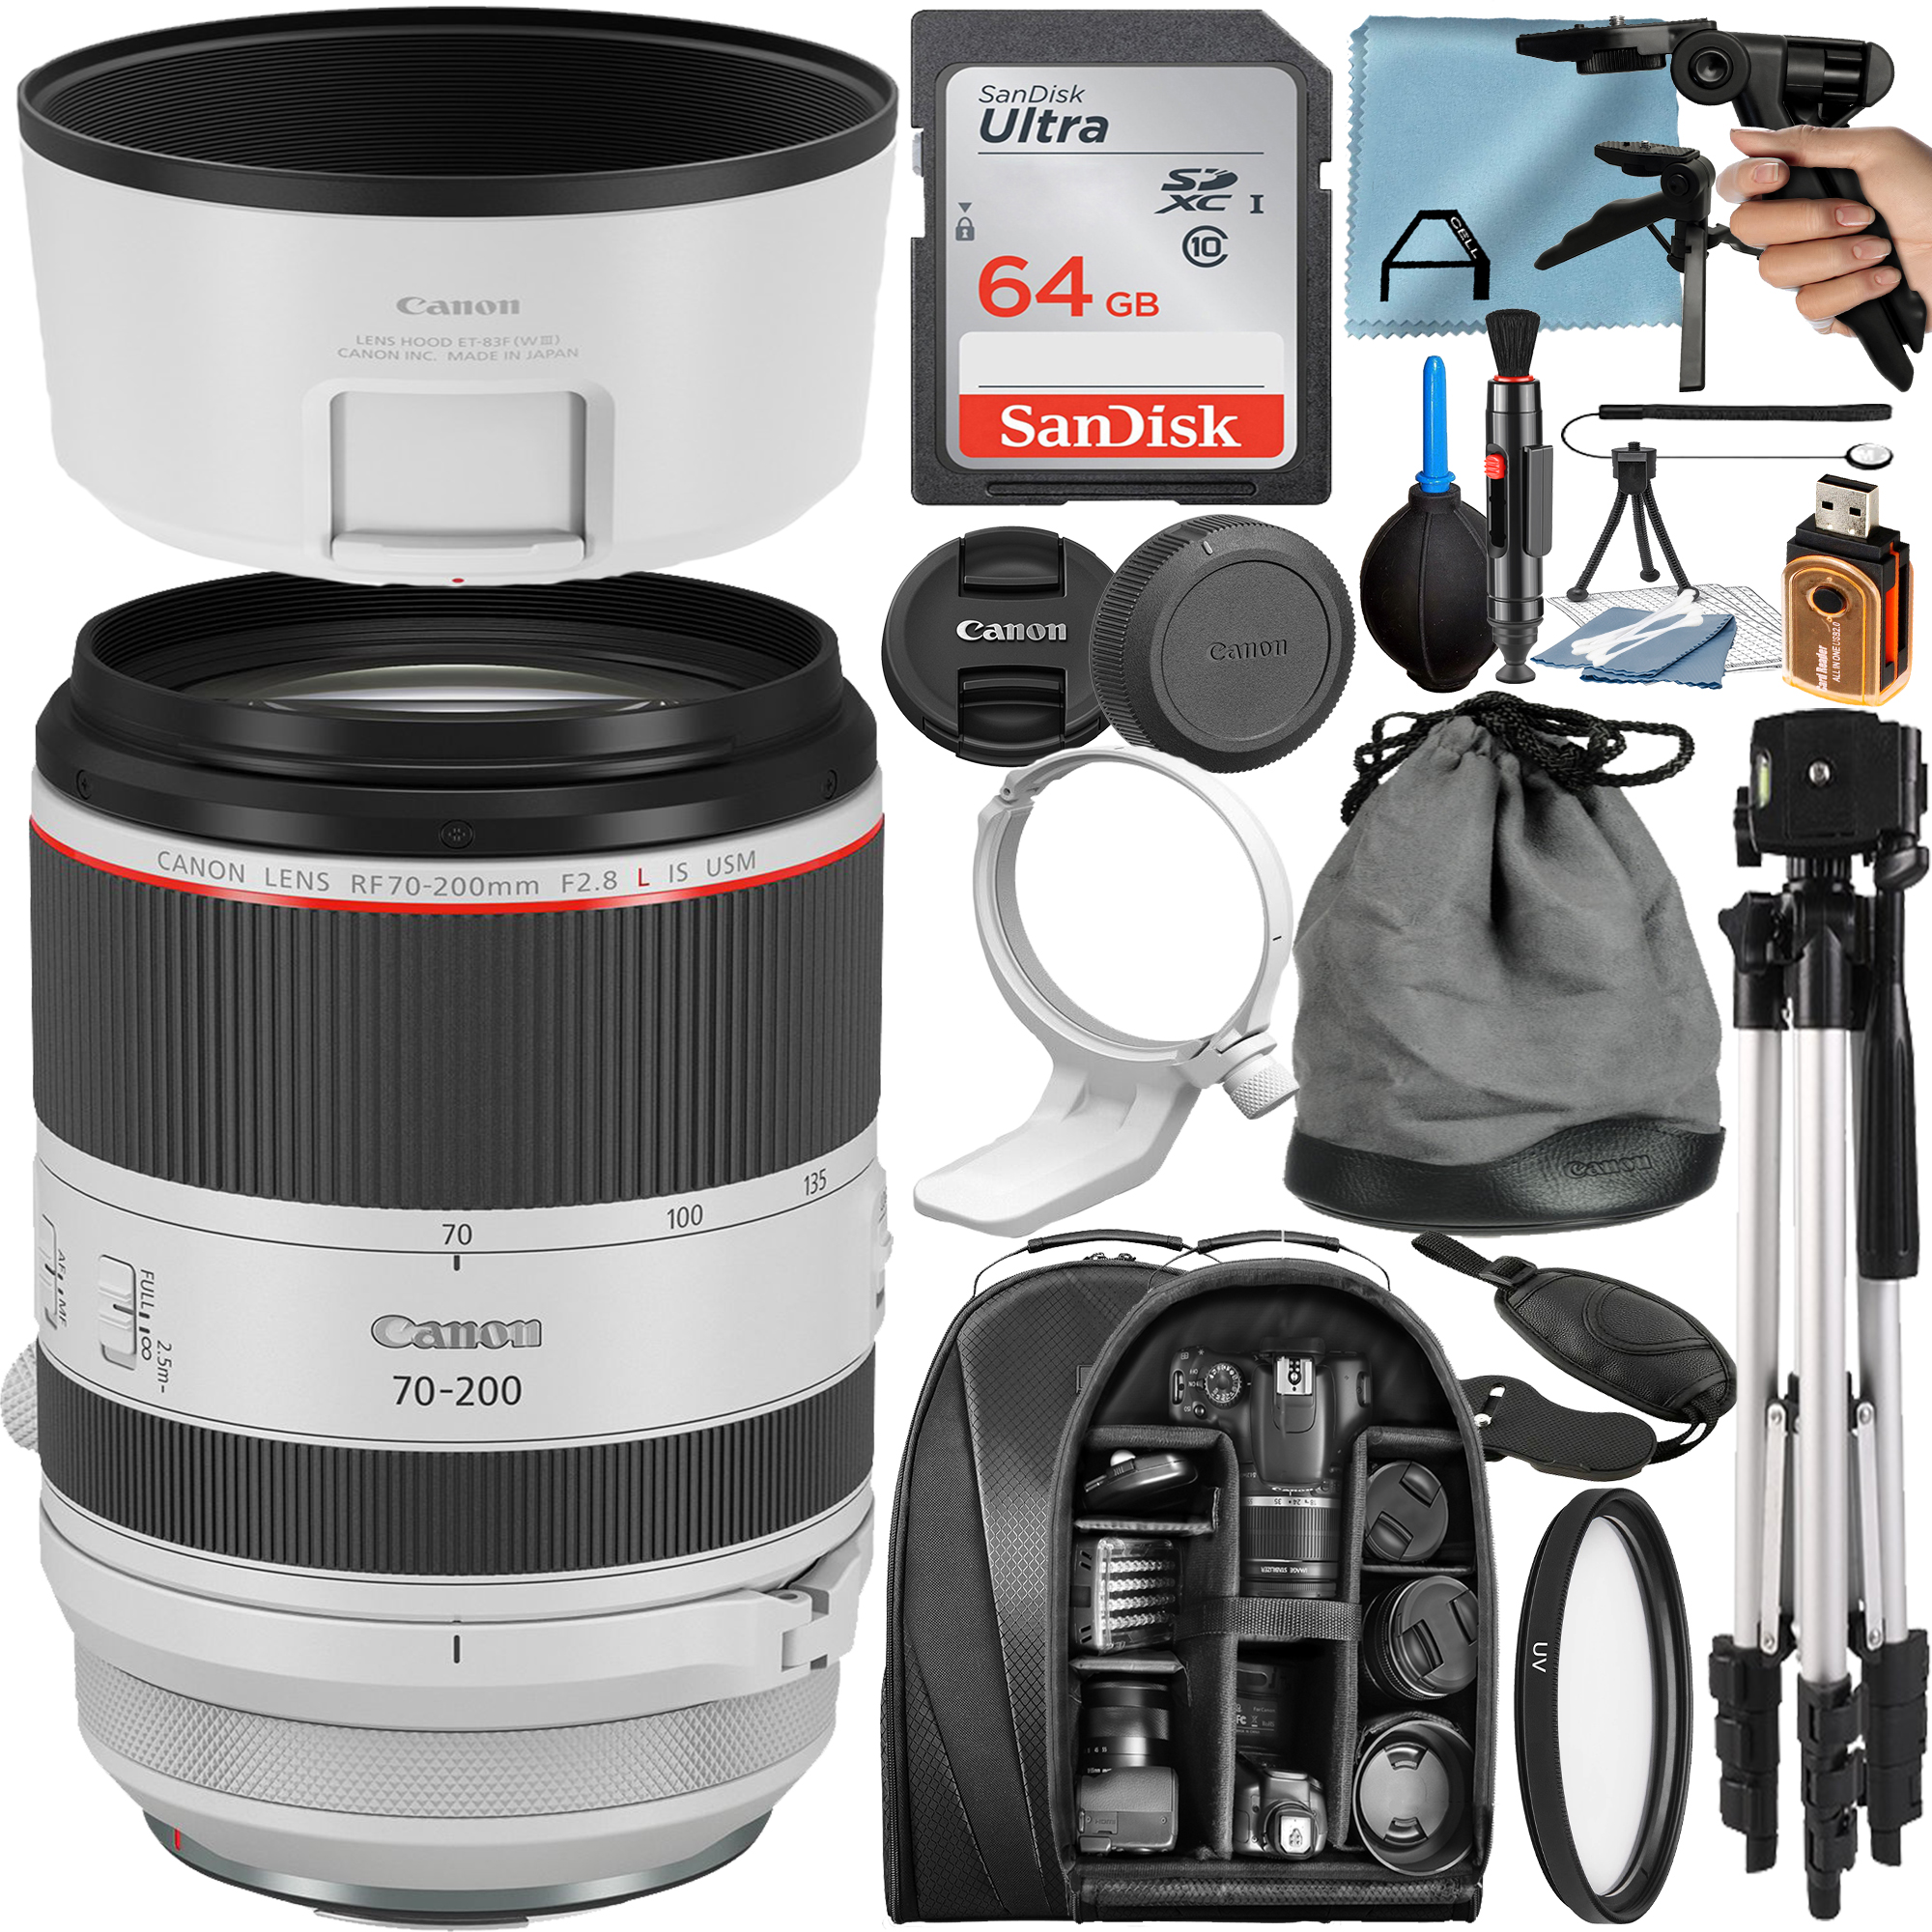 Canon RF 70-200mm F/2.8 L IS USM Telephoto Zoom Lens with 64GB SanDisk Memory Card + Tripod + Backpack + A-Cell Accessory Bundle